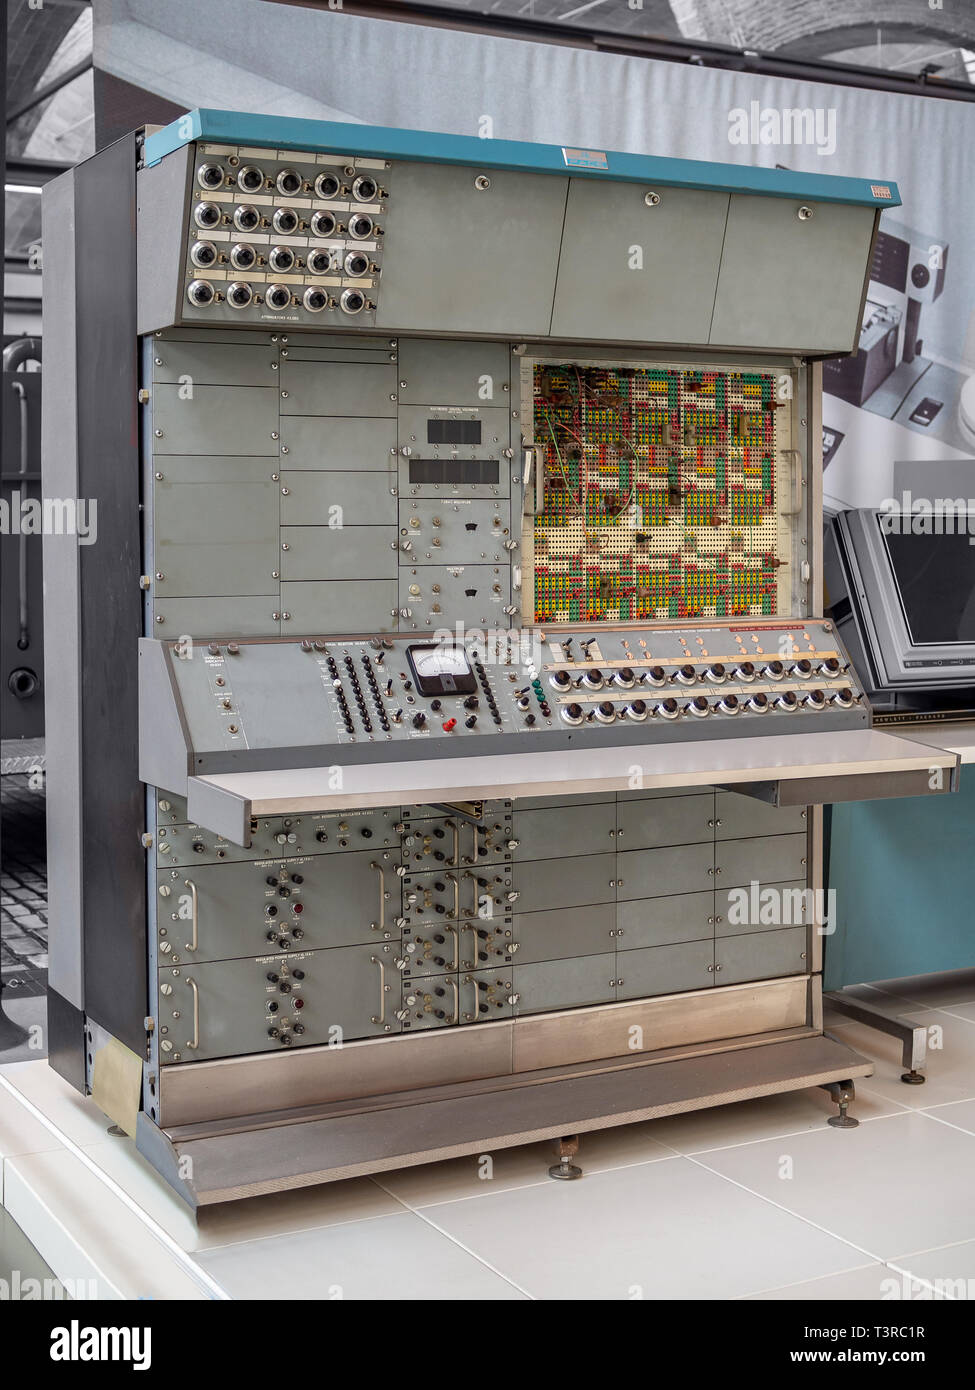 TERRASSA, SPAIN-MARCH 19, 2019: 1974 EAI Pacer 700 analog computer in the National Museum of Science and Technology of Catalonia Stock Photo